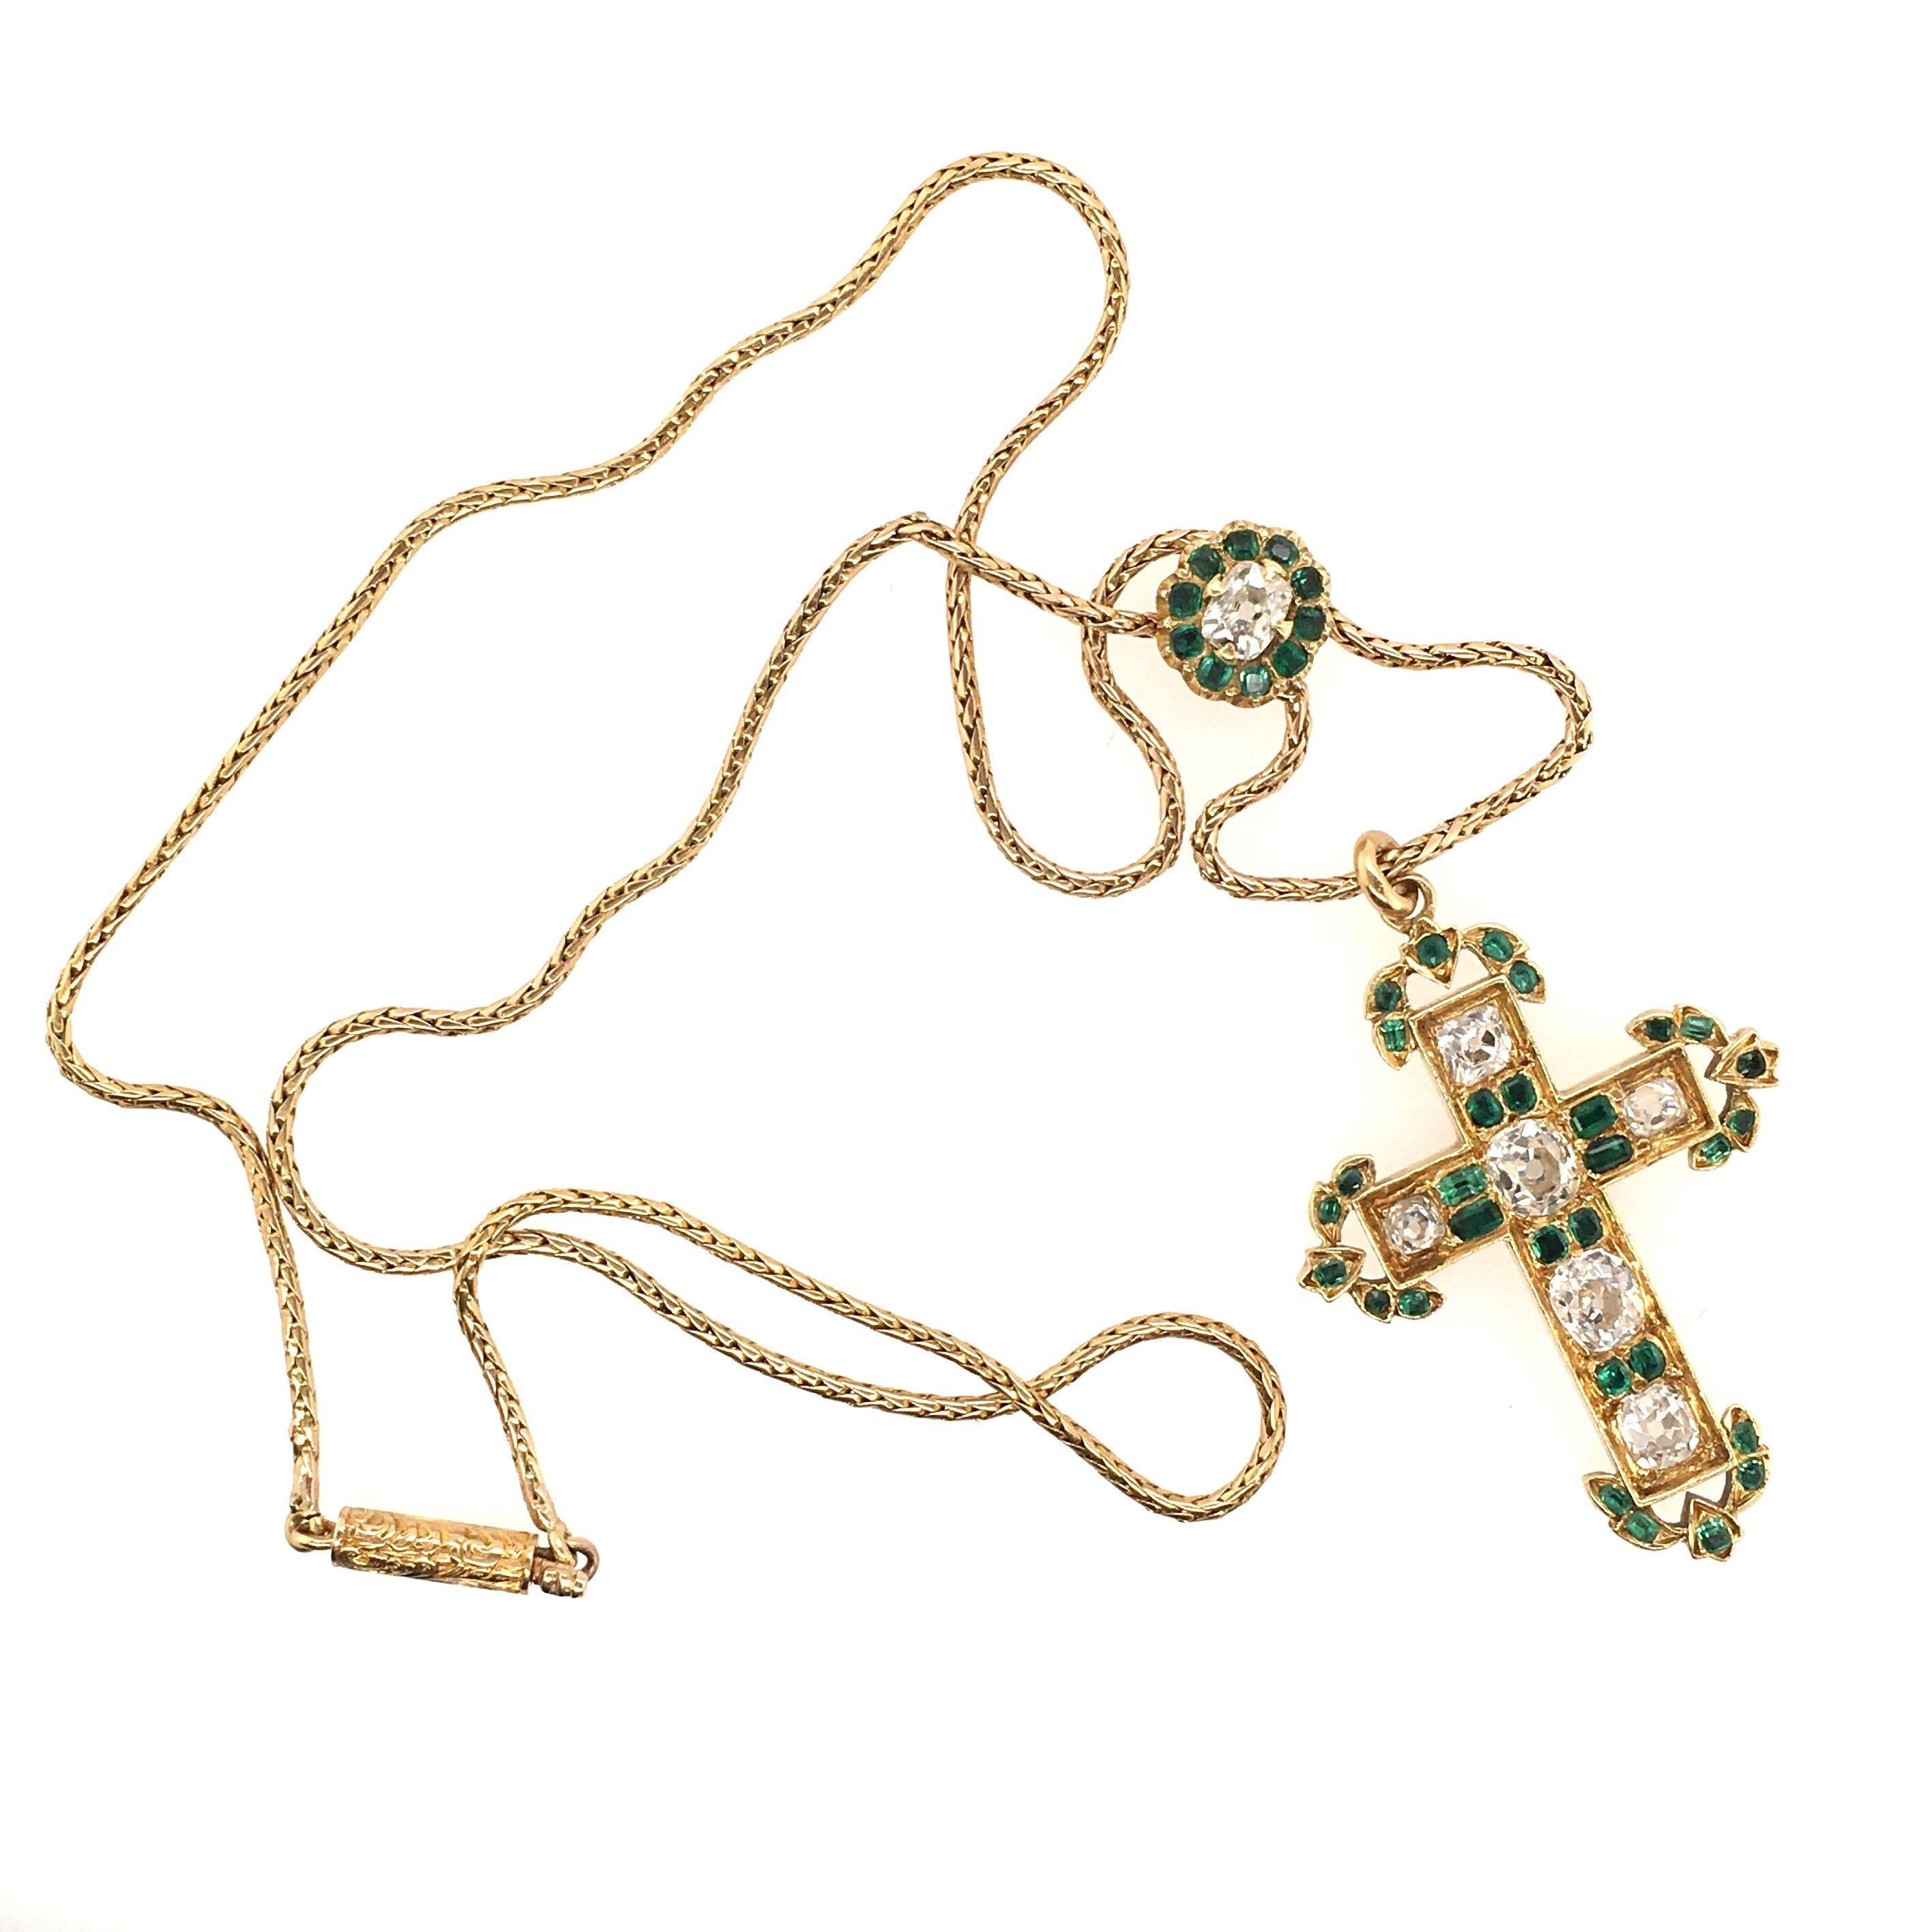 An antique 18 karat yellow gold, diamond and emerald cross pendant necklace. Circa 1890. Set with old mine cut diamonds, enhanced by old cut emerald foliate motifs, suspended from a fine spiga chain enhanced by an old cut diamond and emerald floret